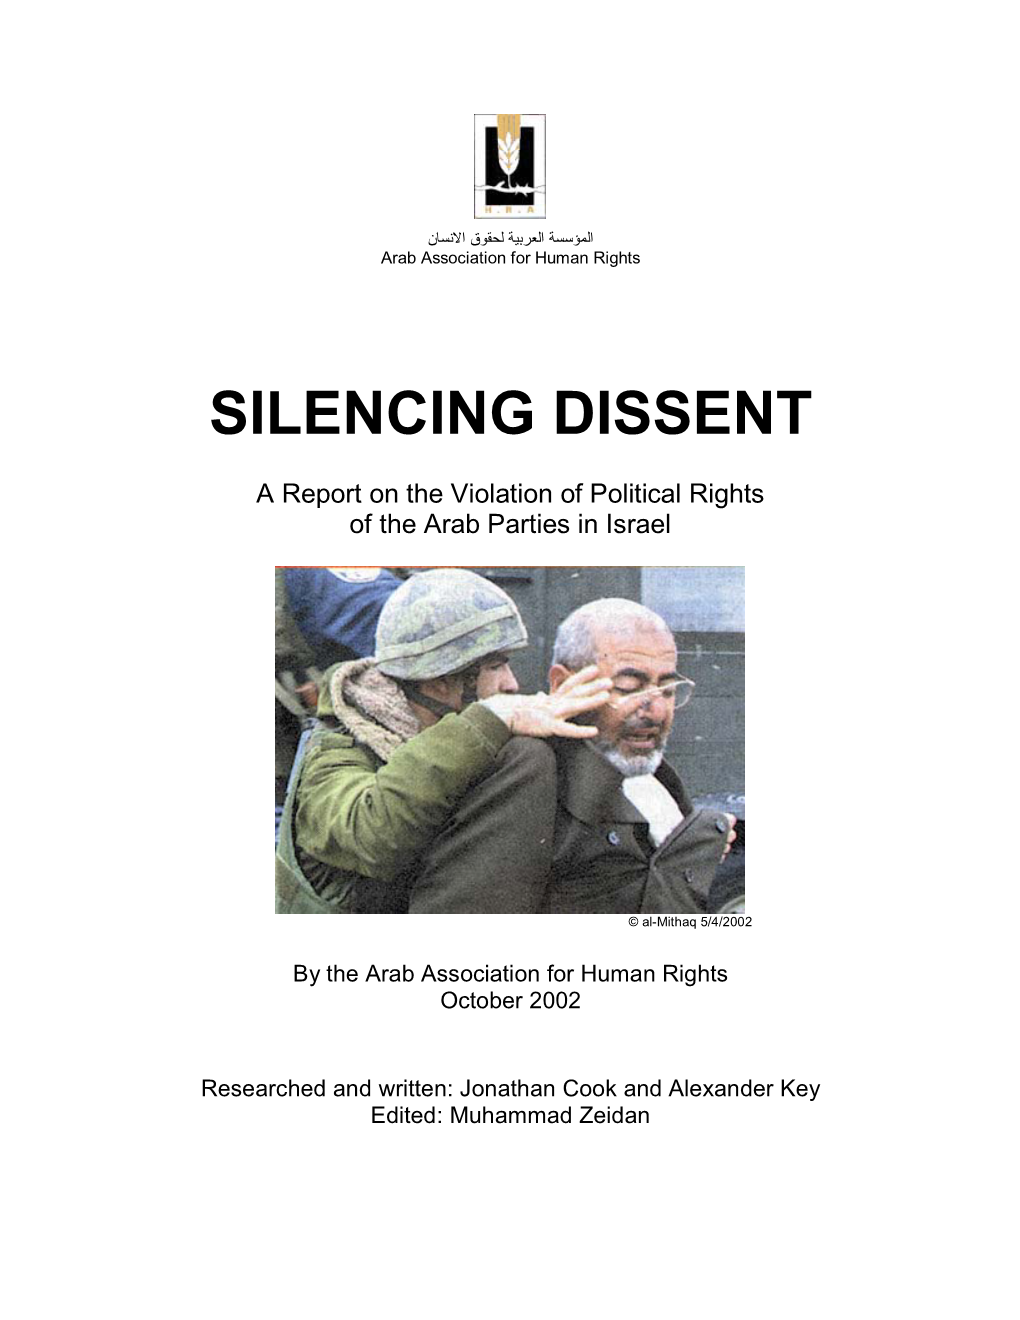 Silencing Dissent